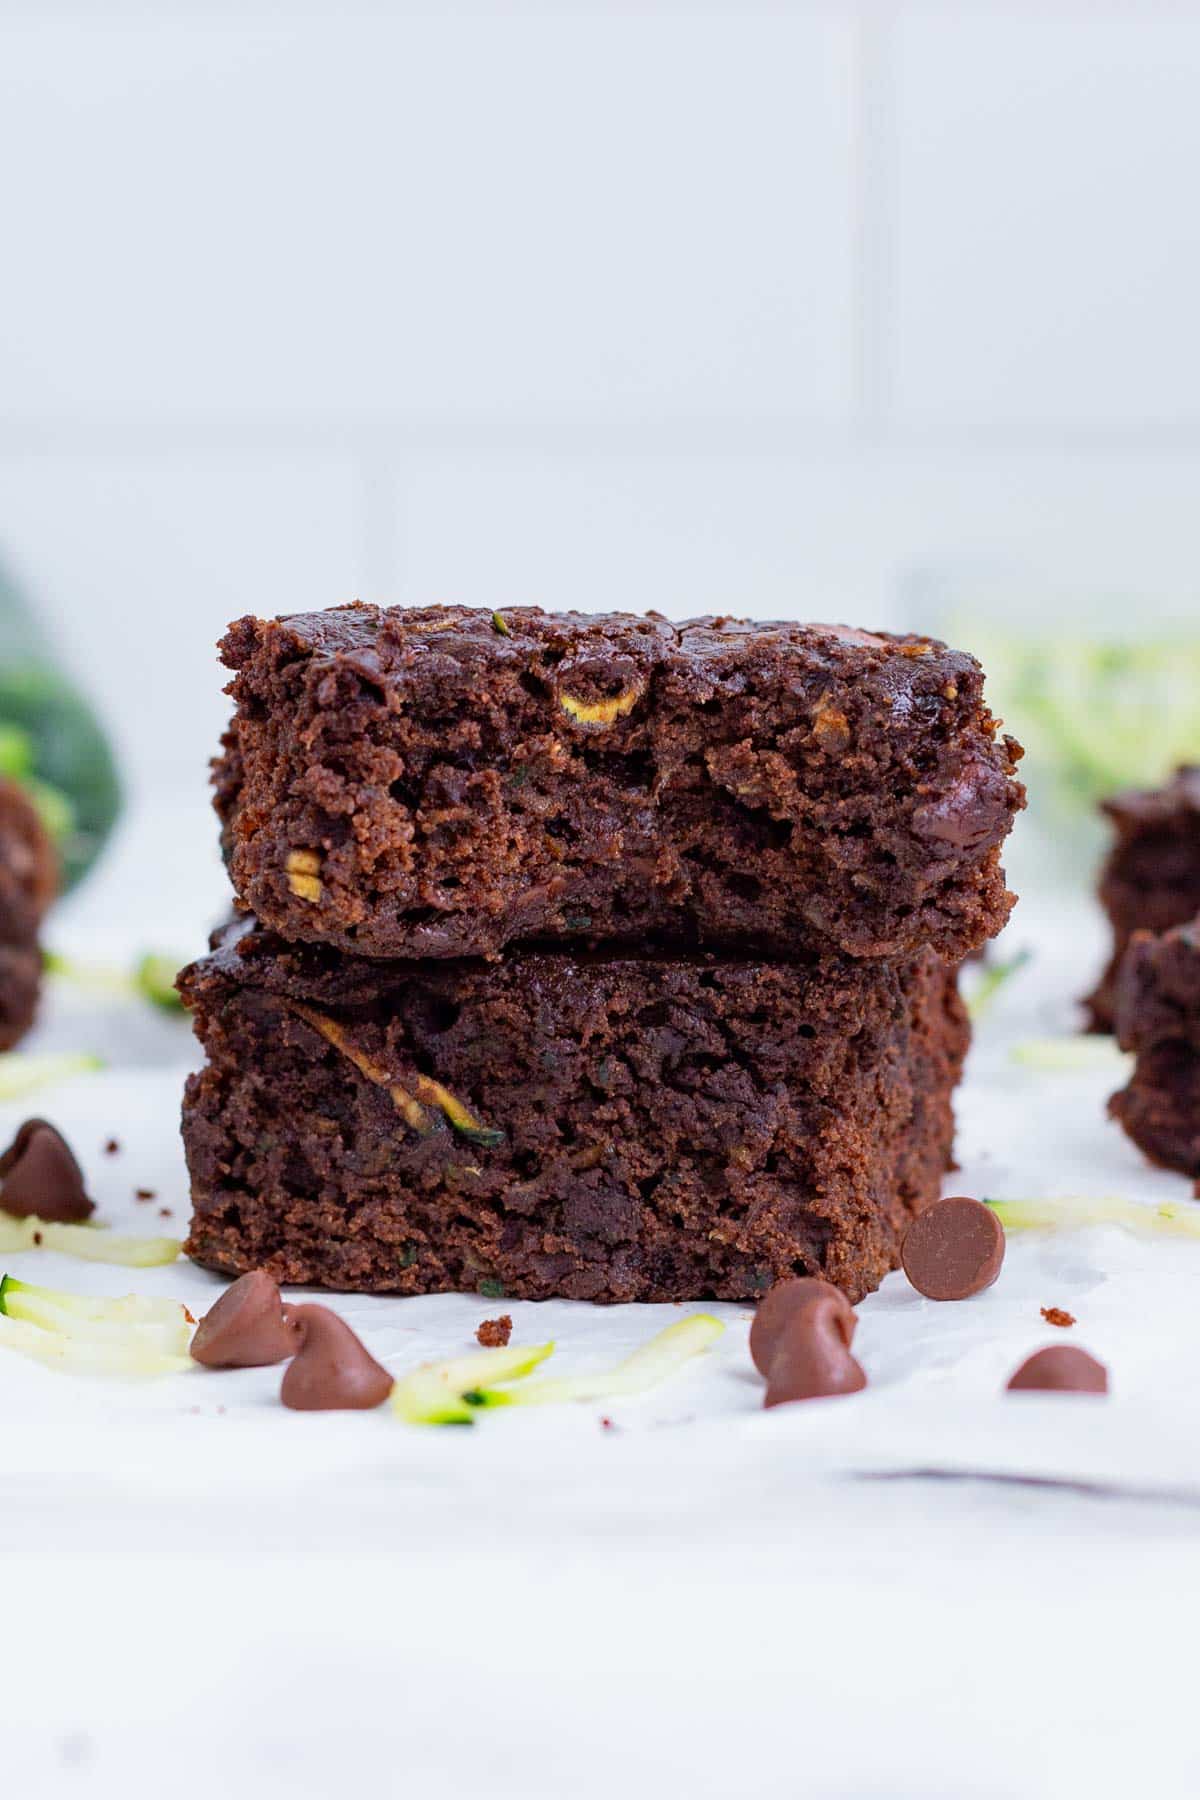 Chocolate zucchini brownies are easy, healthy, full of rich, chocolate flavor.